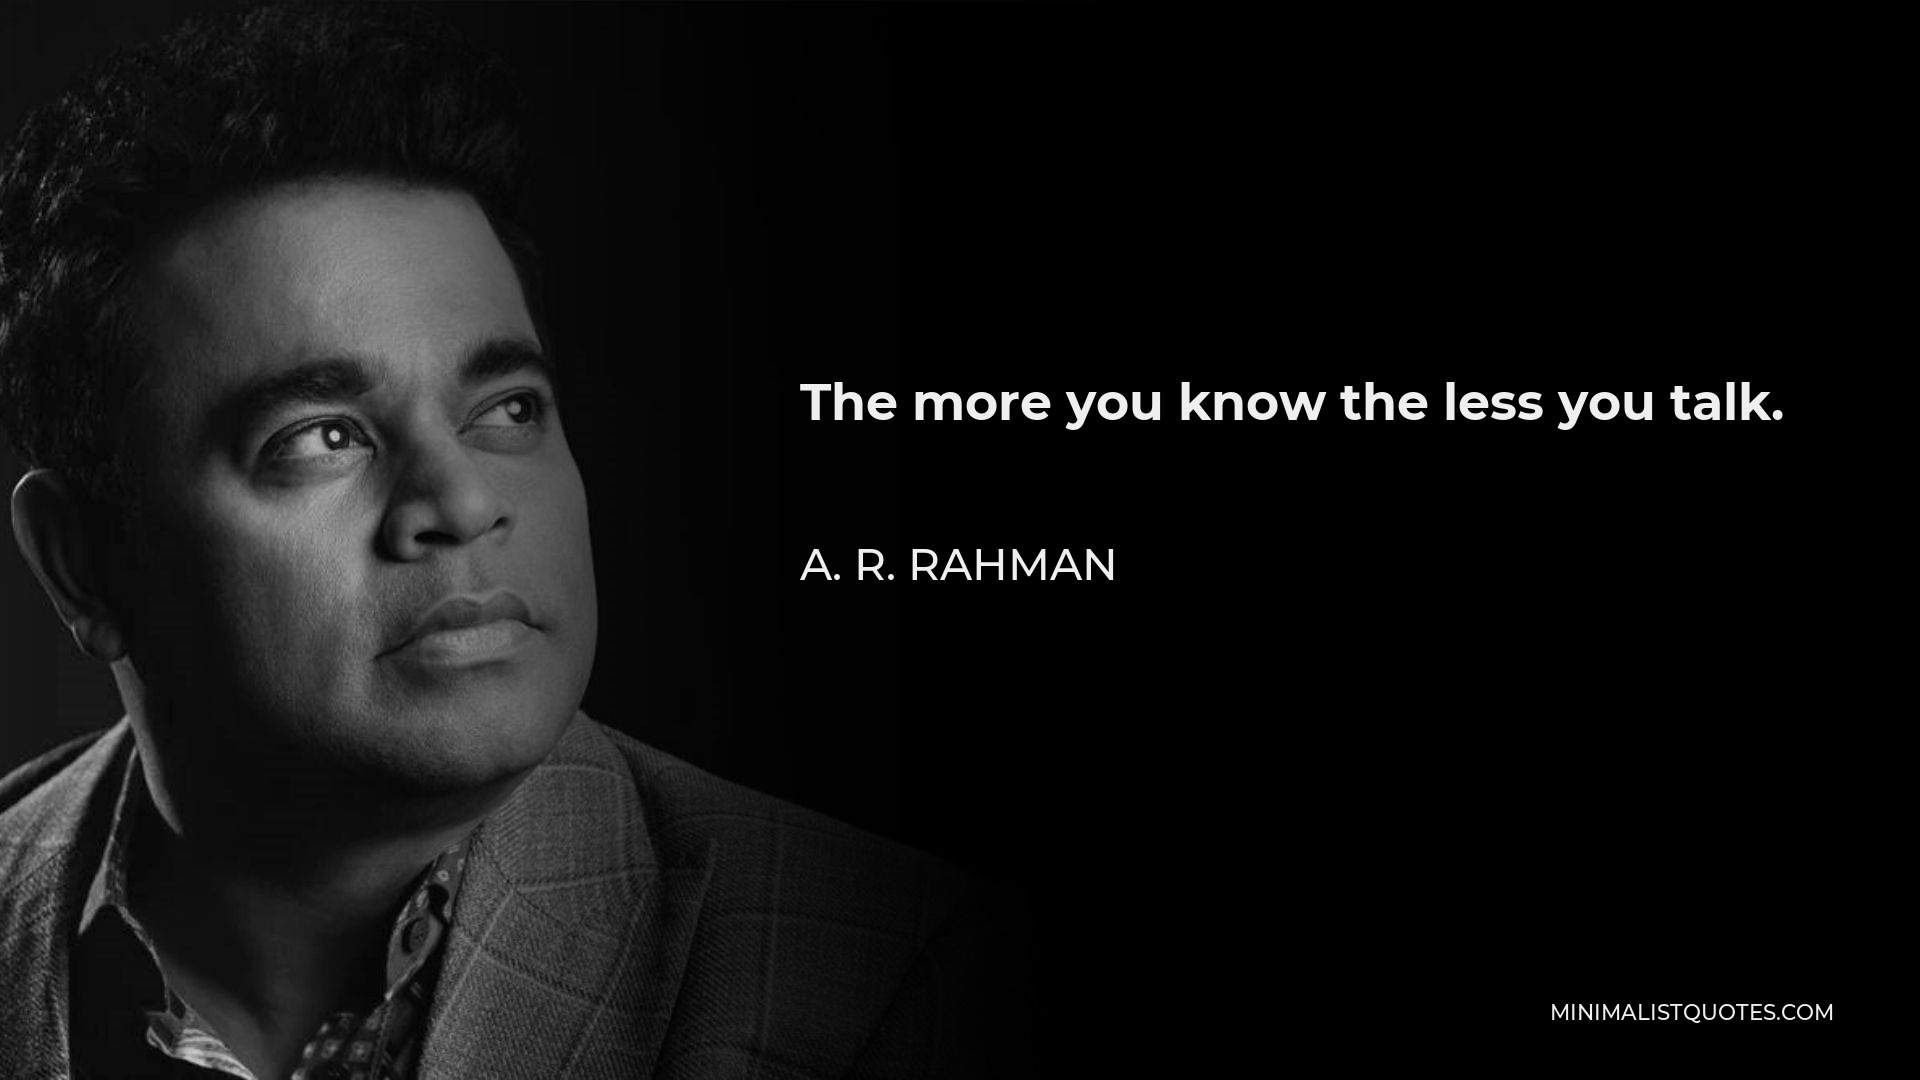 A. R. Rahman Quote - The more you know the less you talk.